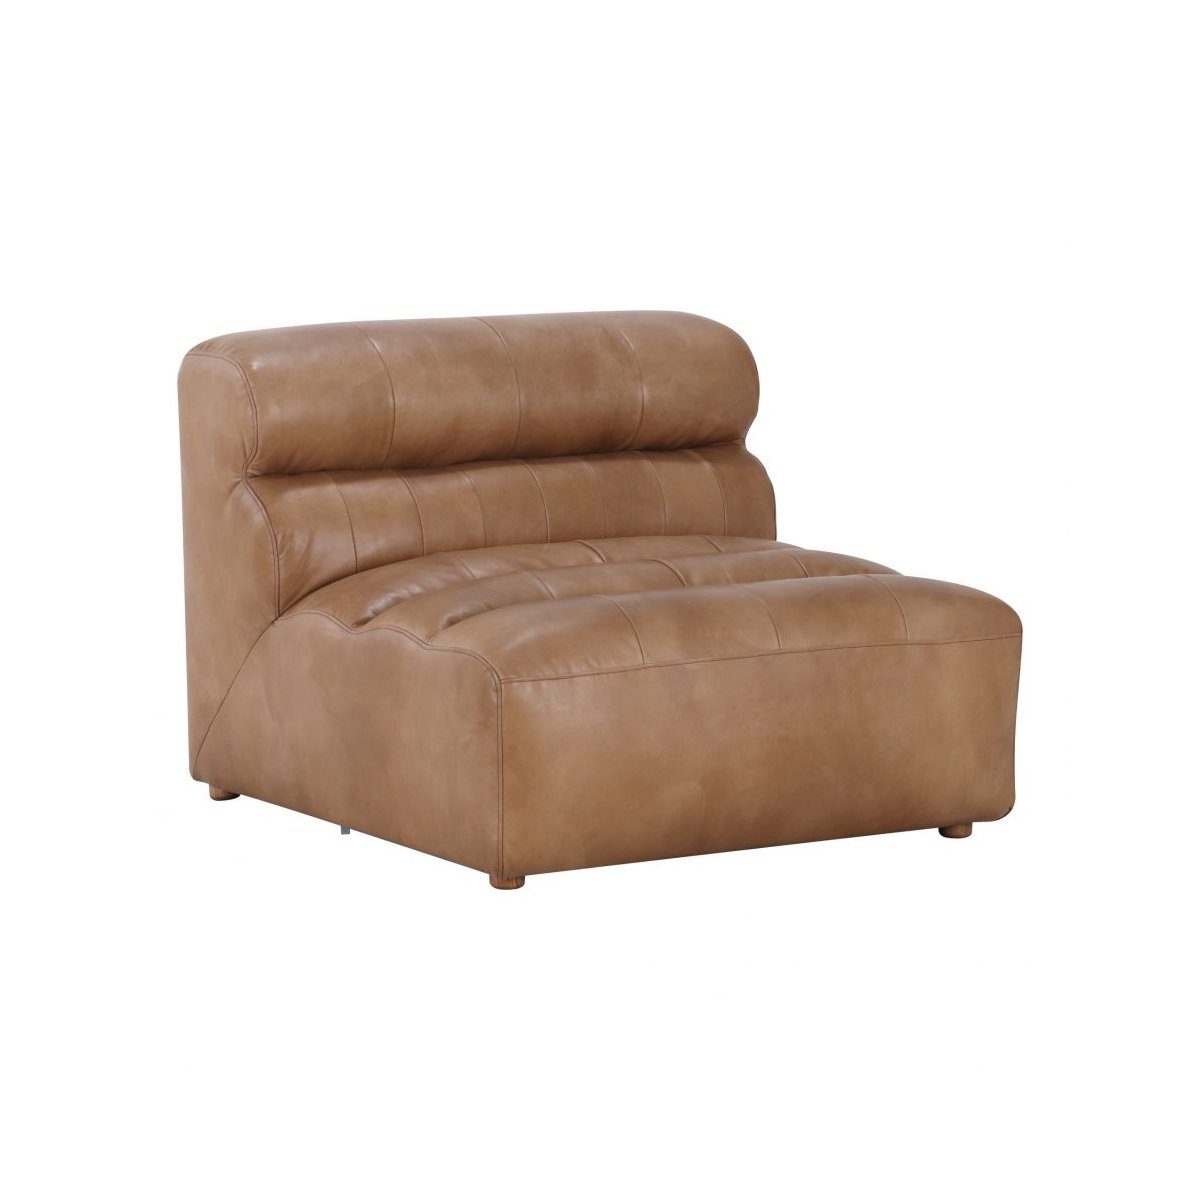 Load image into Gallery viewer, Ramsay Leather Slipper Chair BrownSlipper Chairs Moe&amp;#39;s  Brown   Four Hands, Burke Decor, Mid Century Modern Furniture, Old Bones Furniture Company, Old Bones Co, Modern Mid Century, Designer Furniture, https://www.oldbonesco.com/
